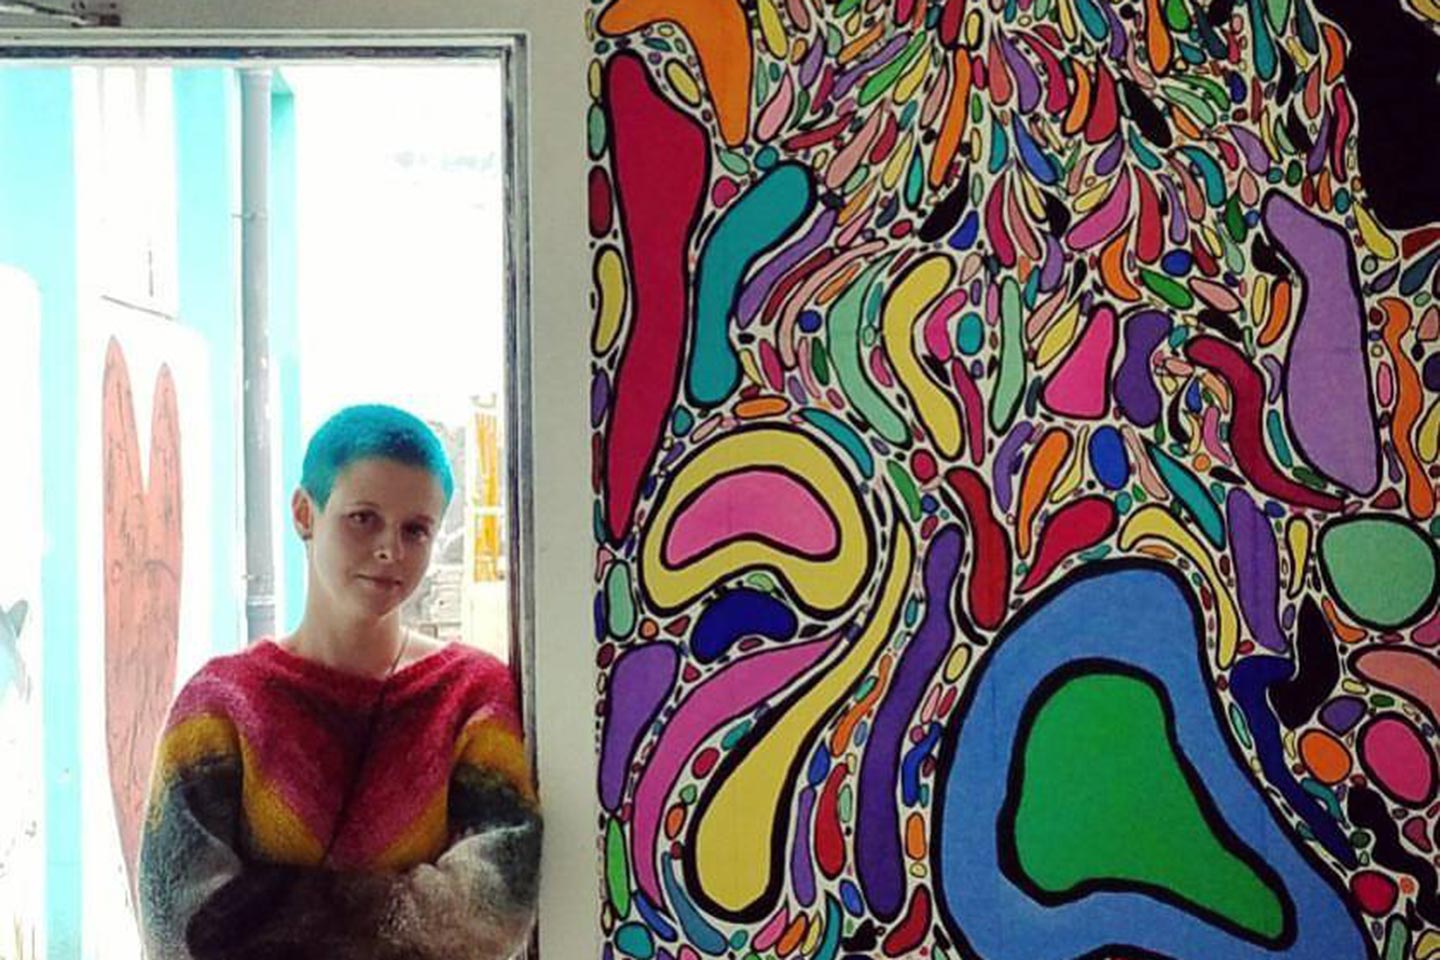 Chelsea Criger standing in an open doorway next to a wall covered in her art work in Iceland